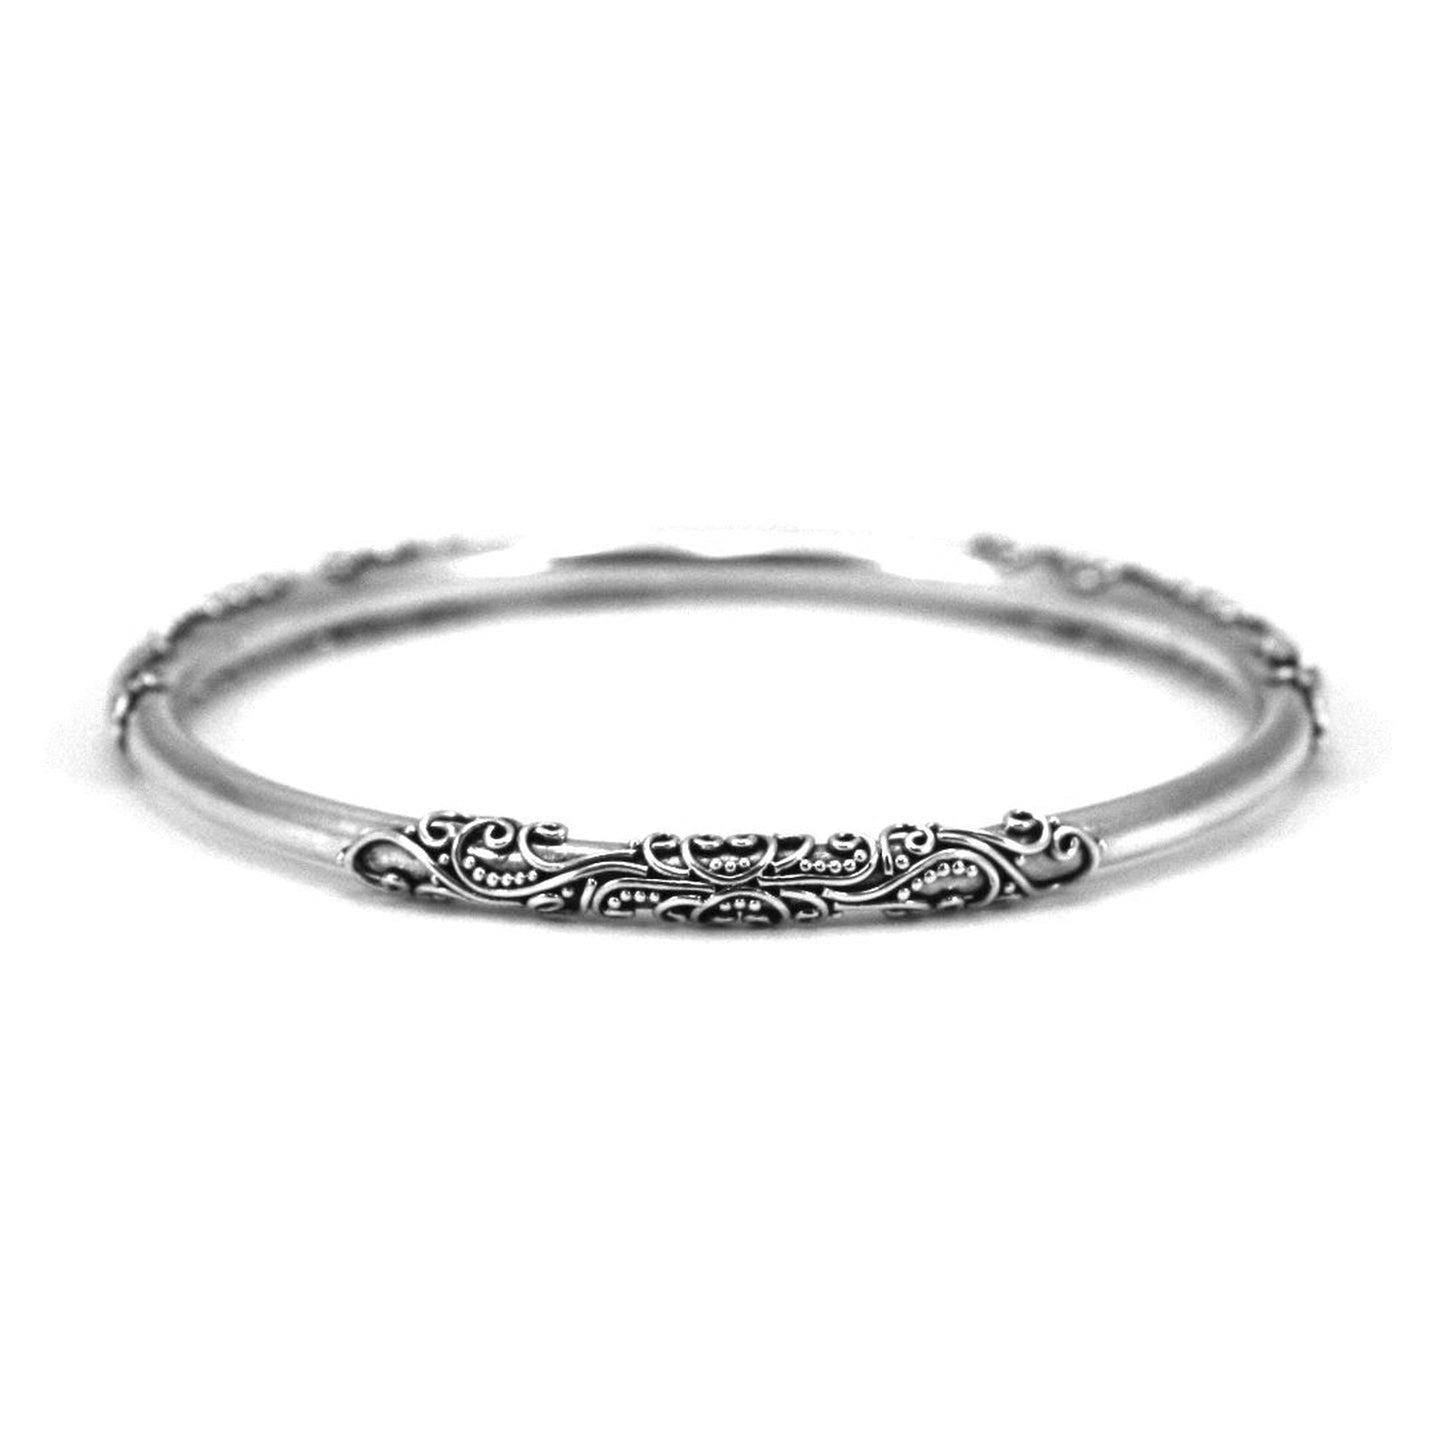 Silver bangle bracelet with three areas of filigree wire adornment.